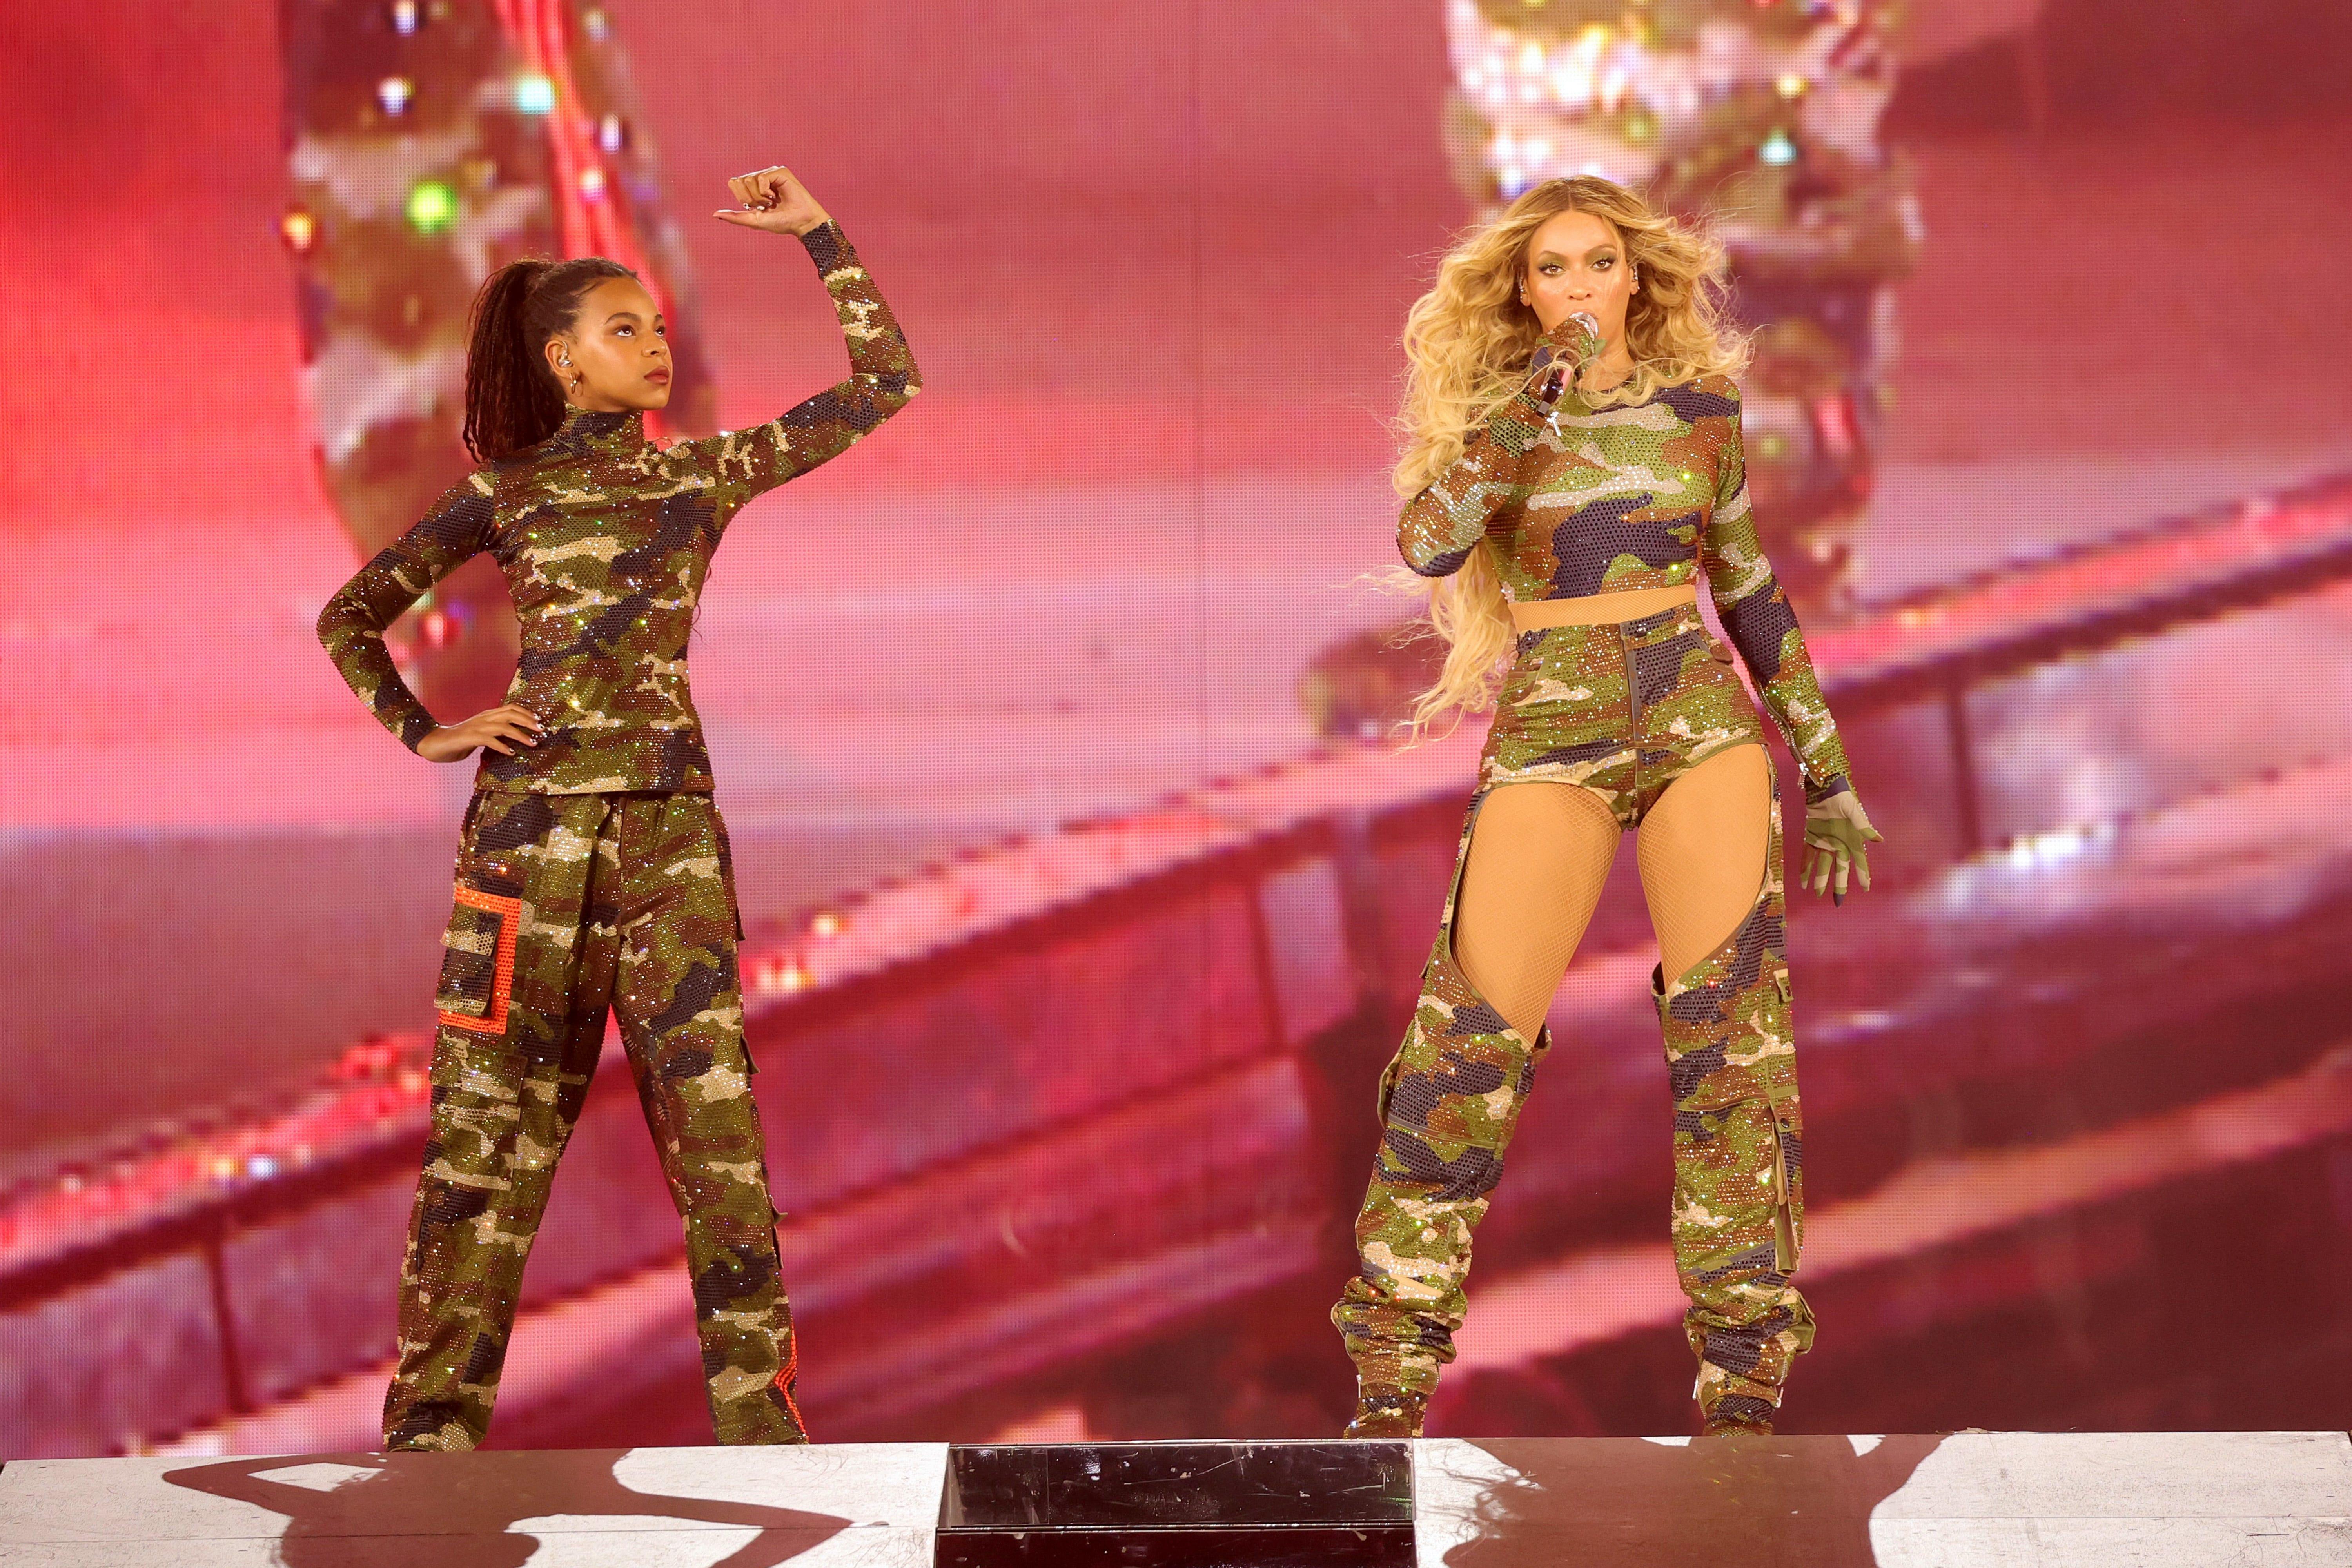 Blue Ivy Carter and Beyoncé perform onstage during the "Renaissance World Tour" at Mercedes-Benz Stadium in Atlanta, Georgia, on Aug. 11, 2023.